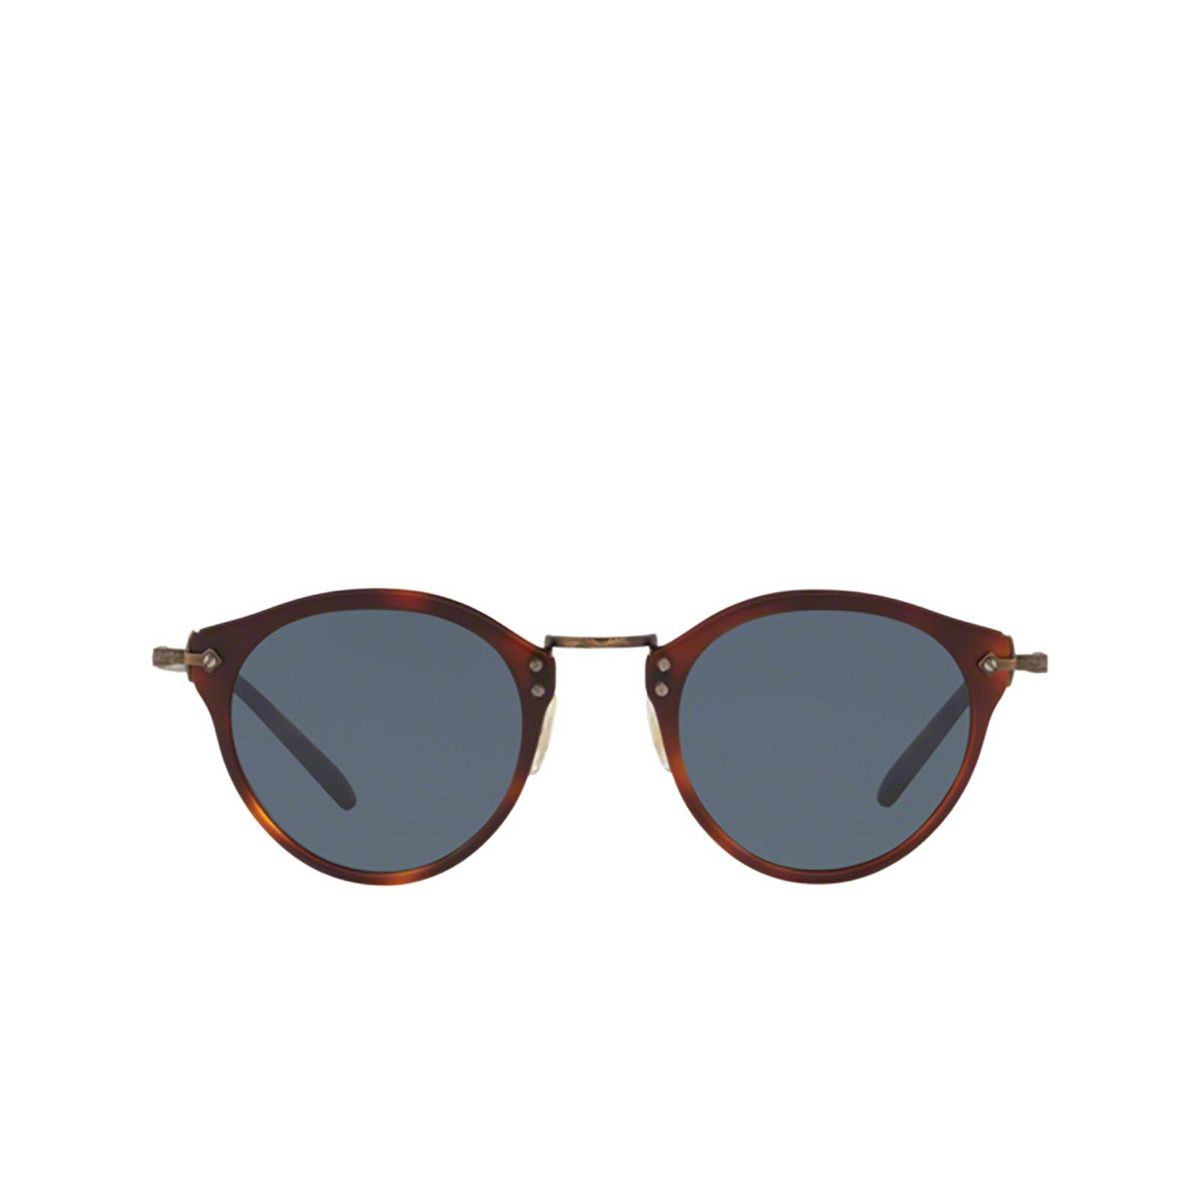 Oliver Peoples OP-505 Sunglasses 1007R5 Dark Mahogany - front view